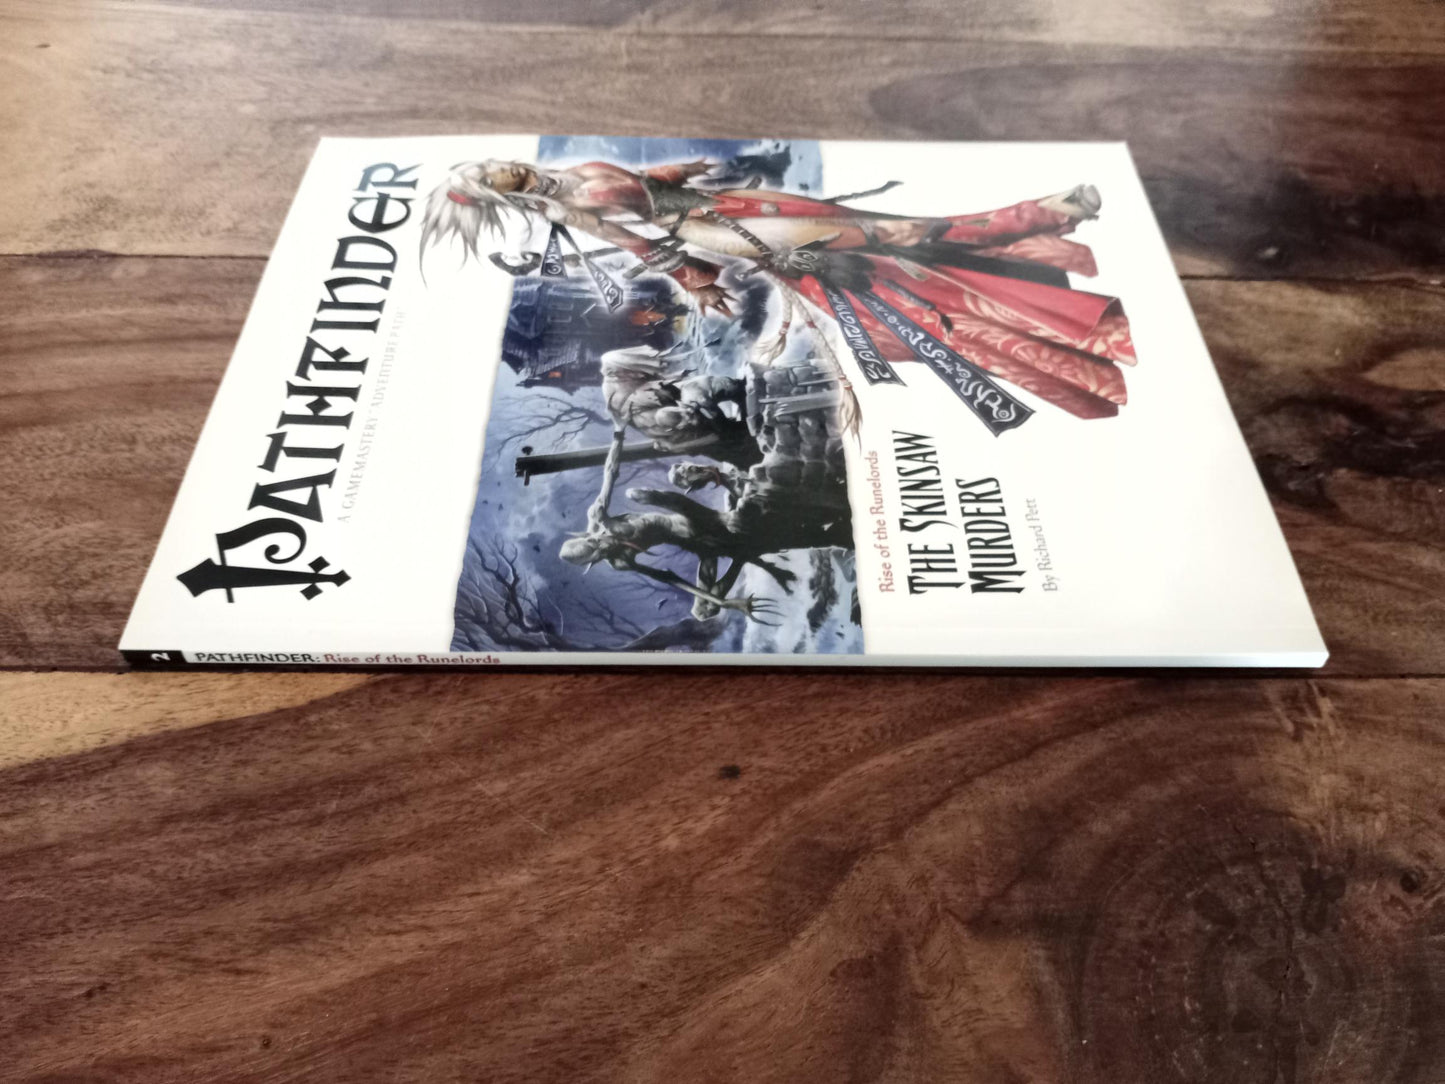 Pathfinder The Skinsaw Murders Rise of the Runelords #2 Paizo Publishing 2007